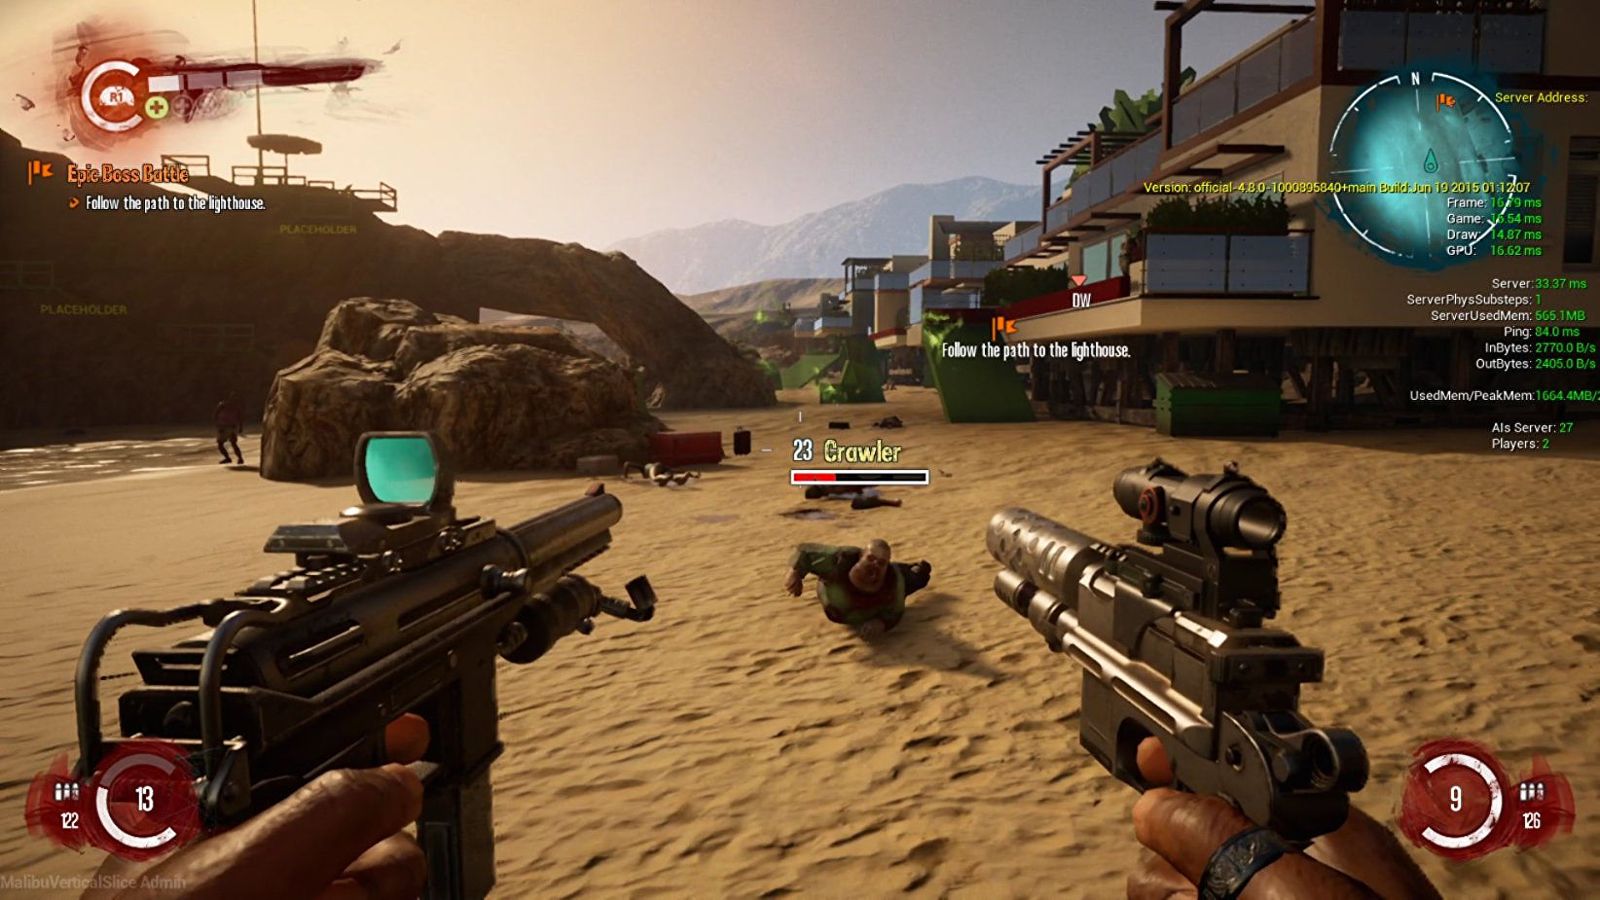 A shot from the leaked Dead Island 2 build